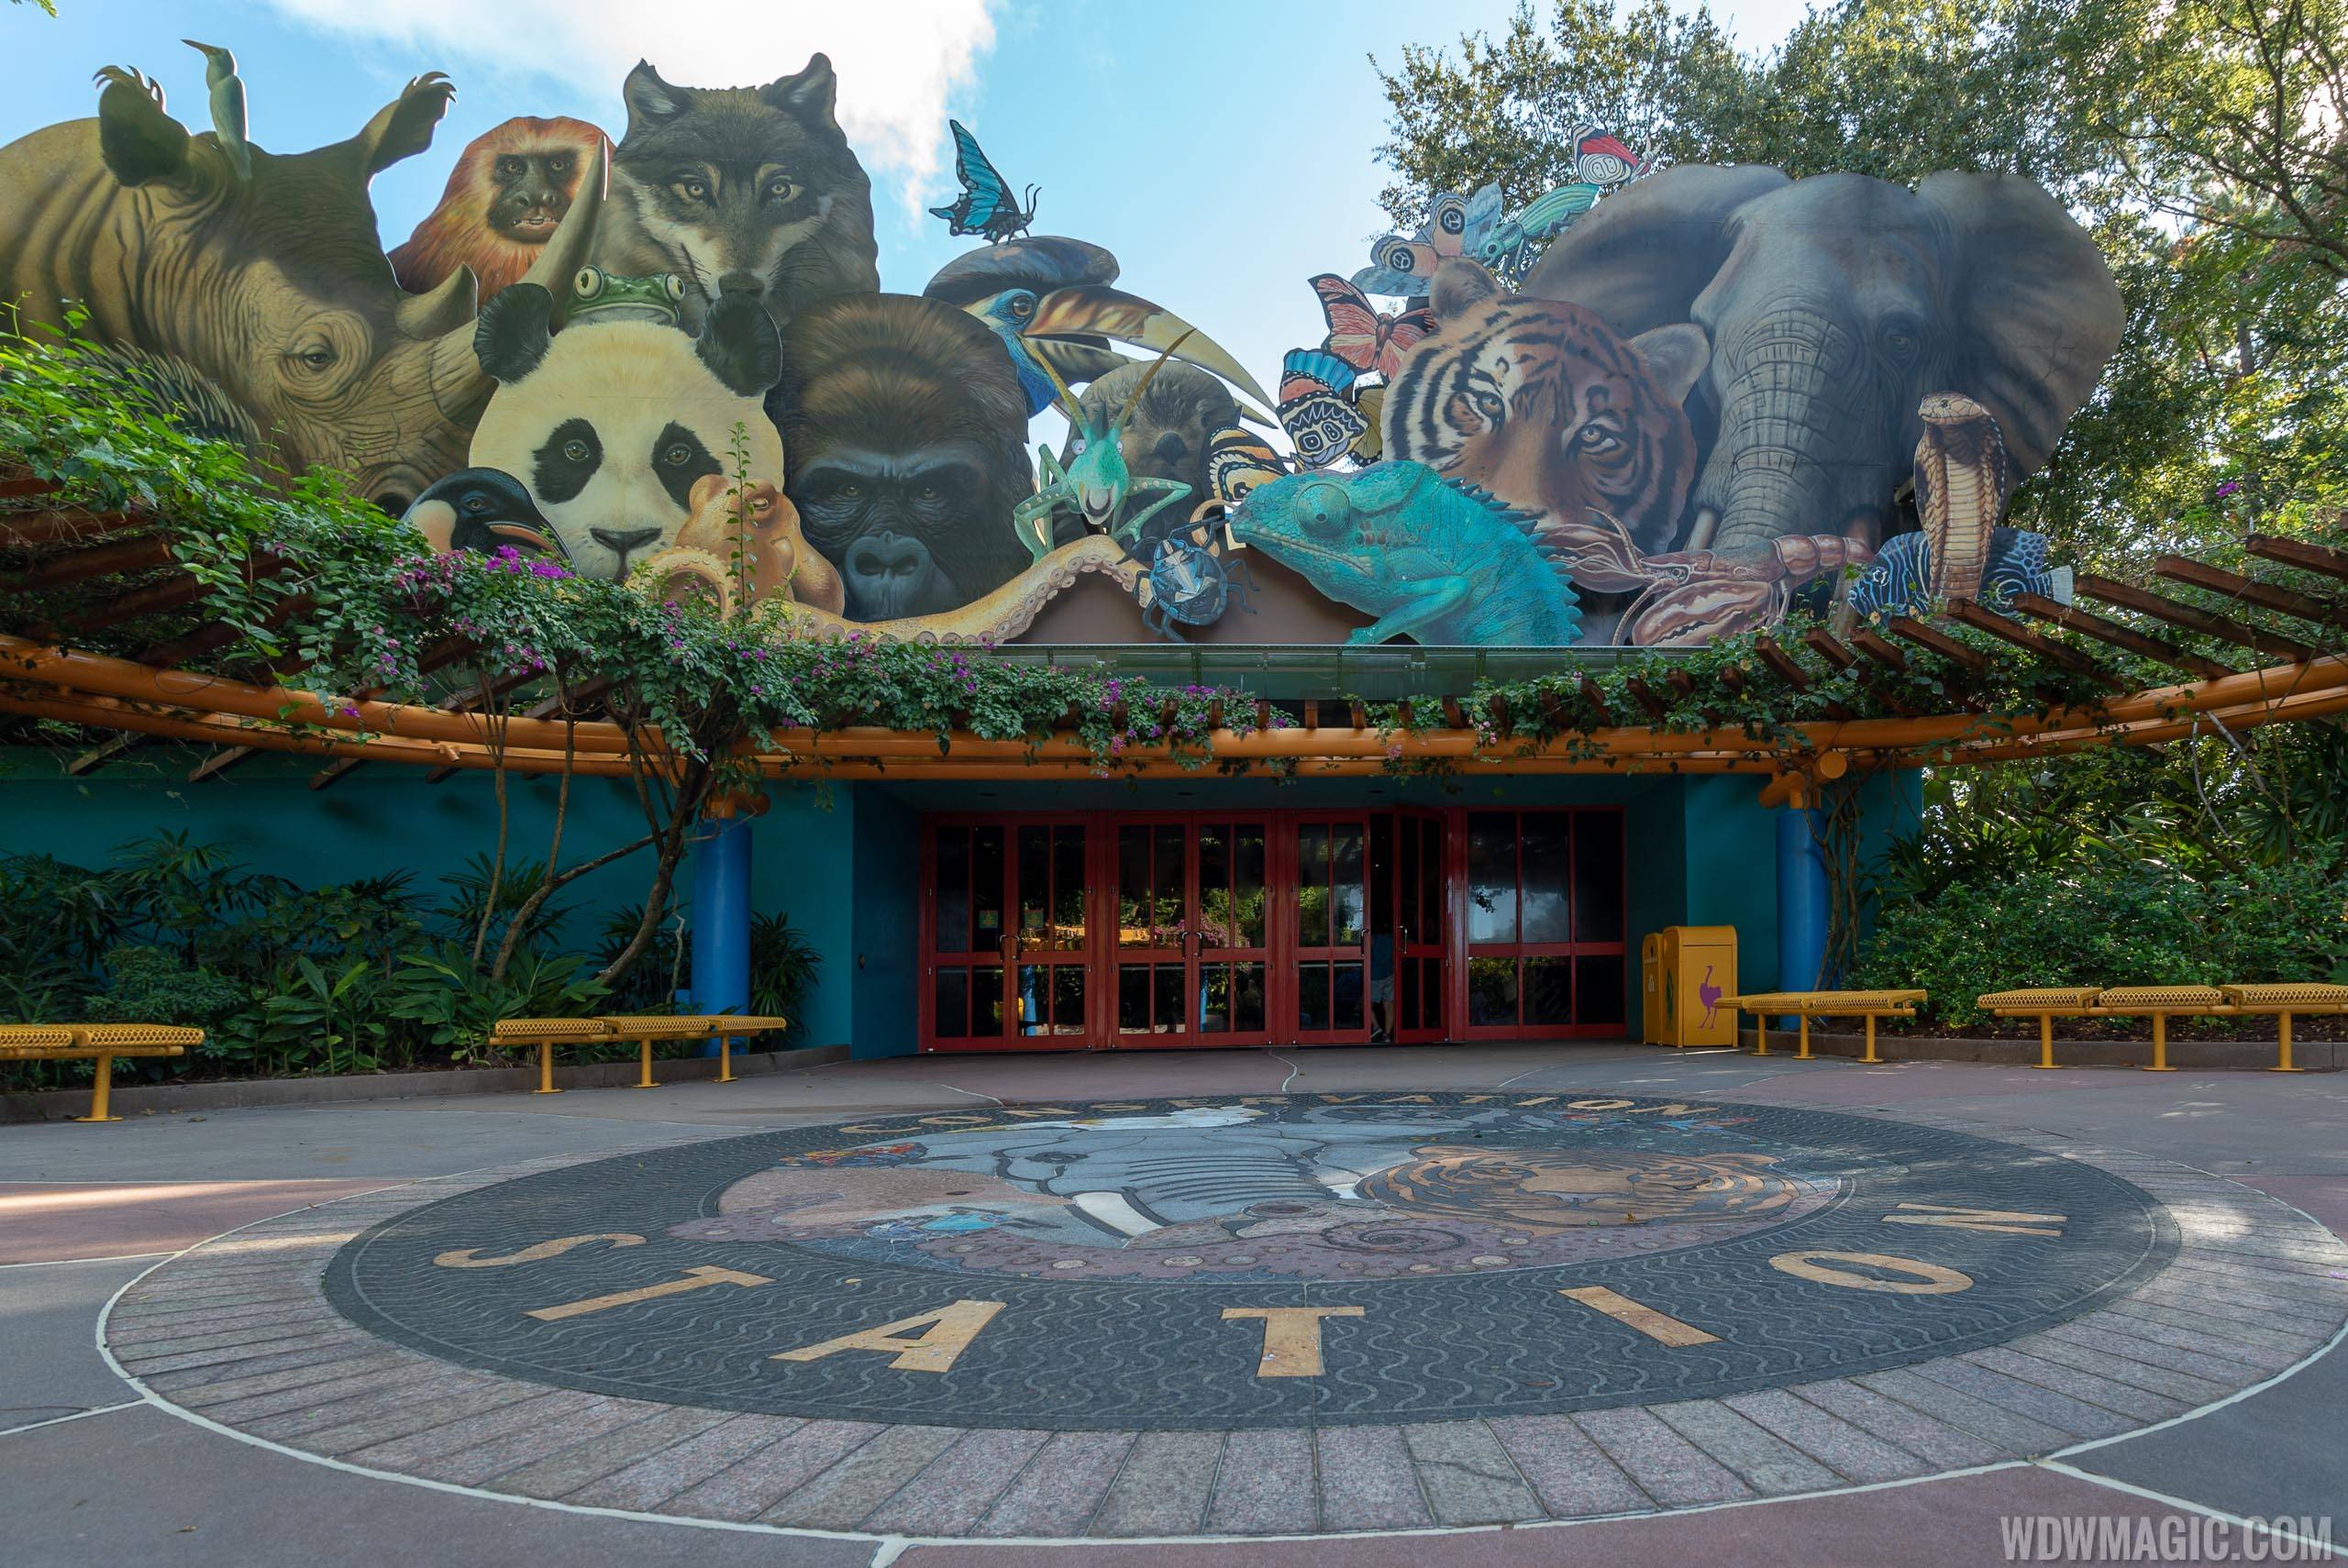 'Out of the Wild' permanently closing at Rafiki's Planet Watch in Disney's Animal Kingdom